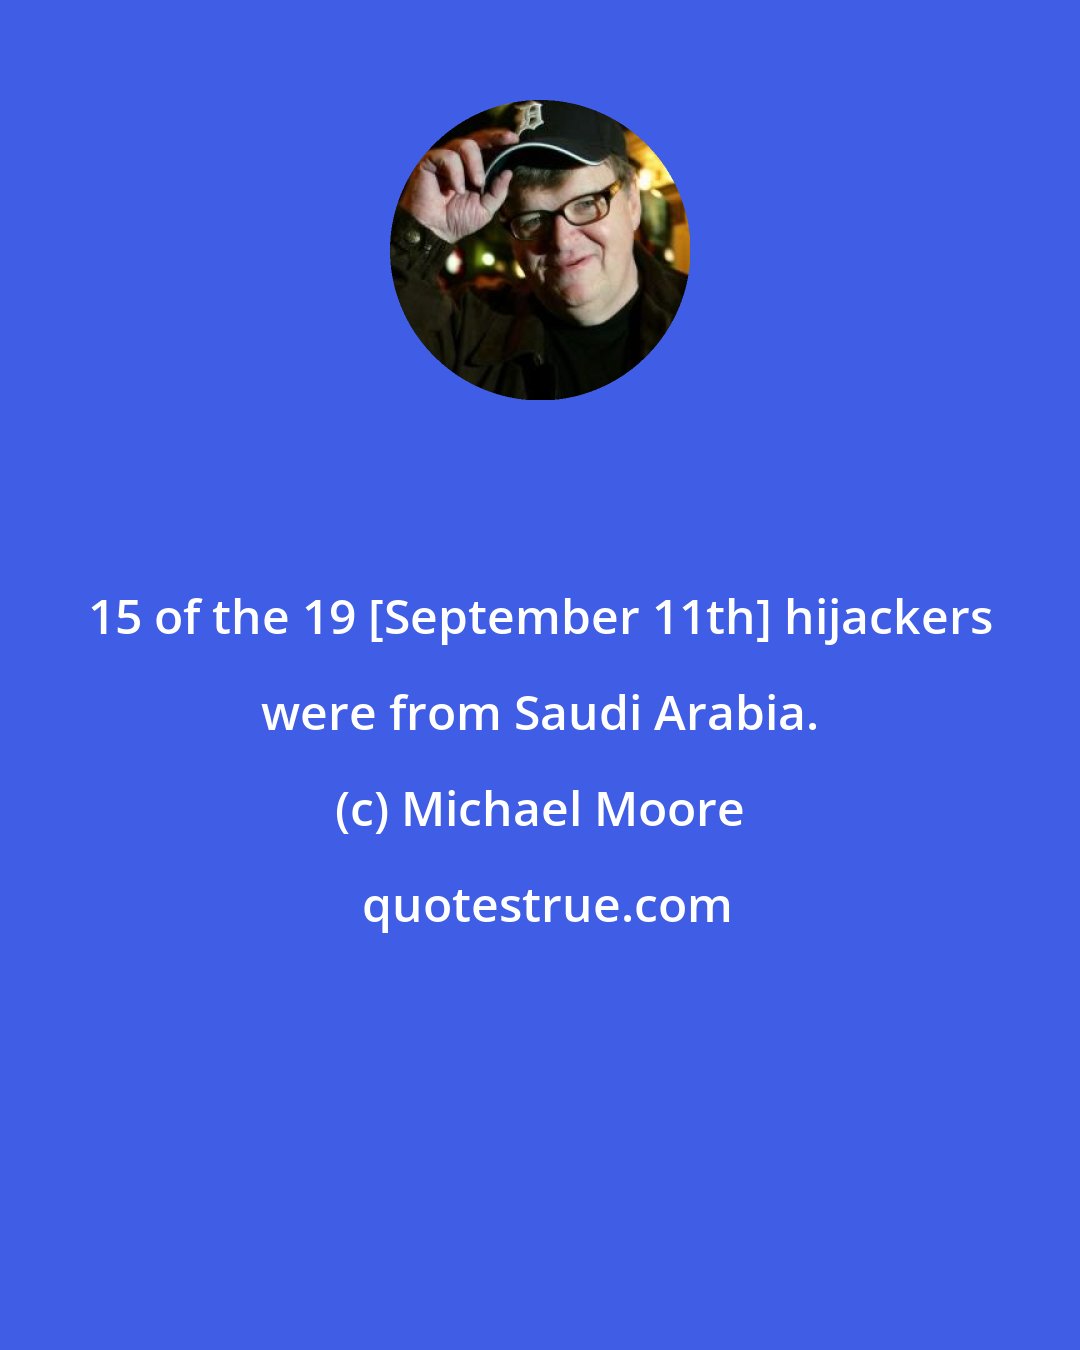 Michael Moore: 15 of the 19 [September 11th] hijackers were from Saudi Arabia.